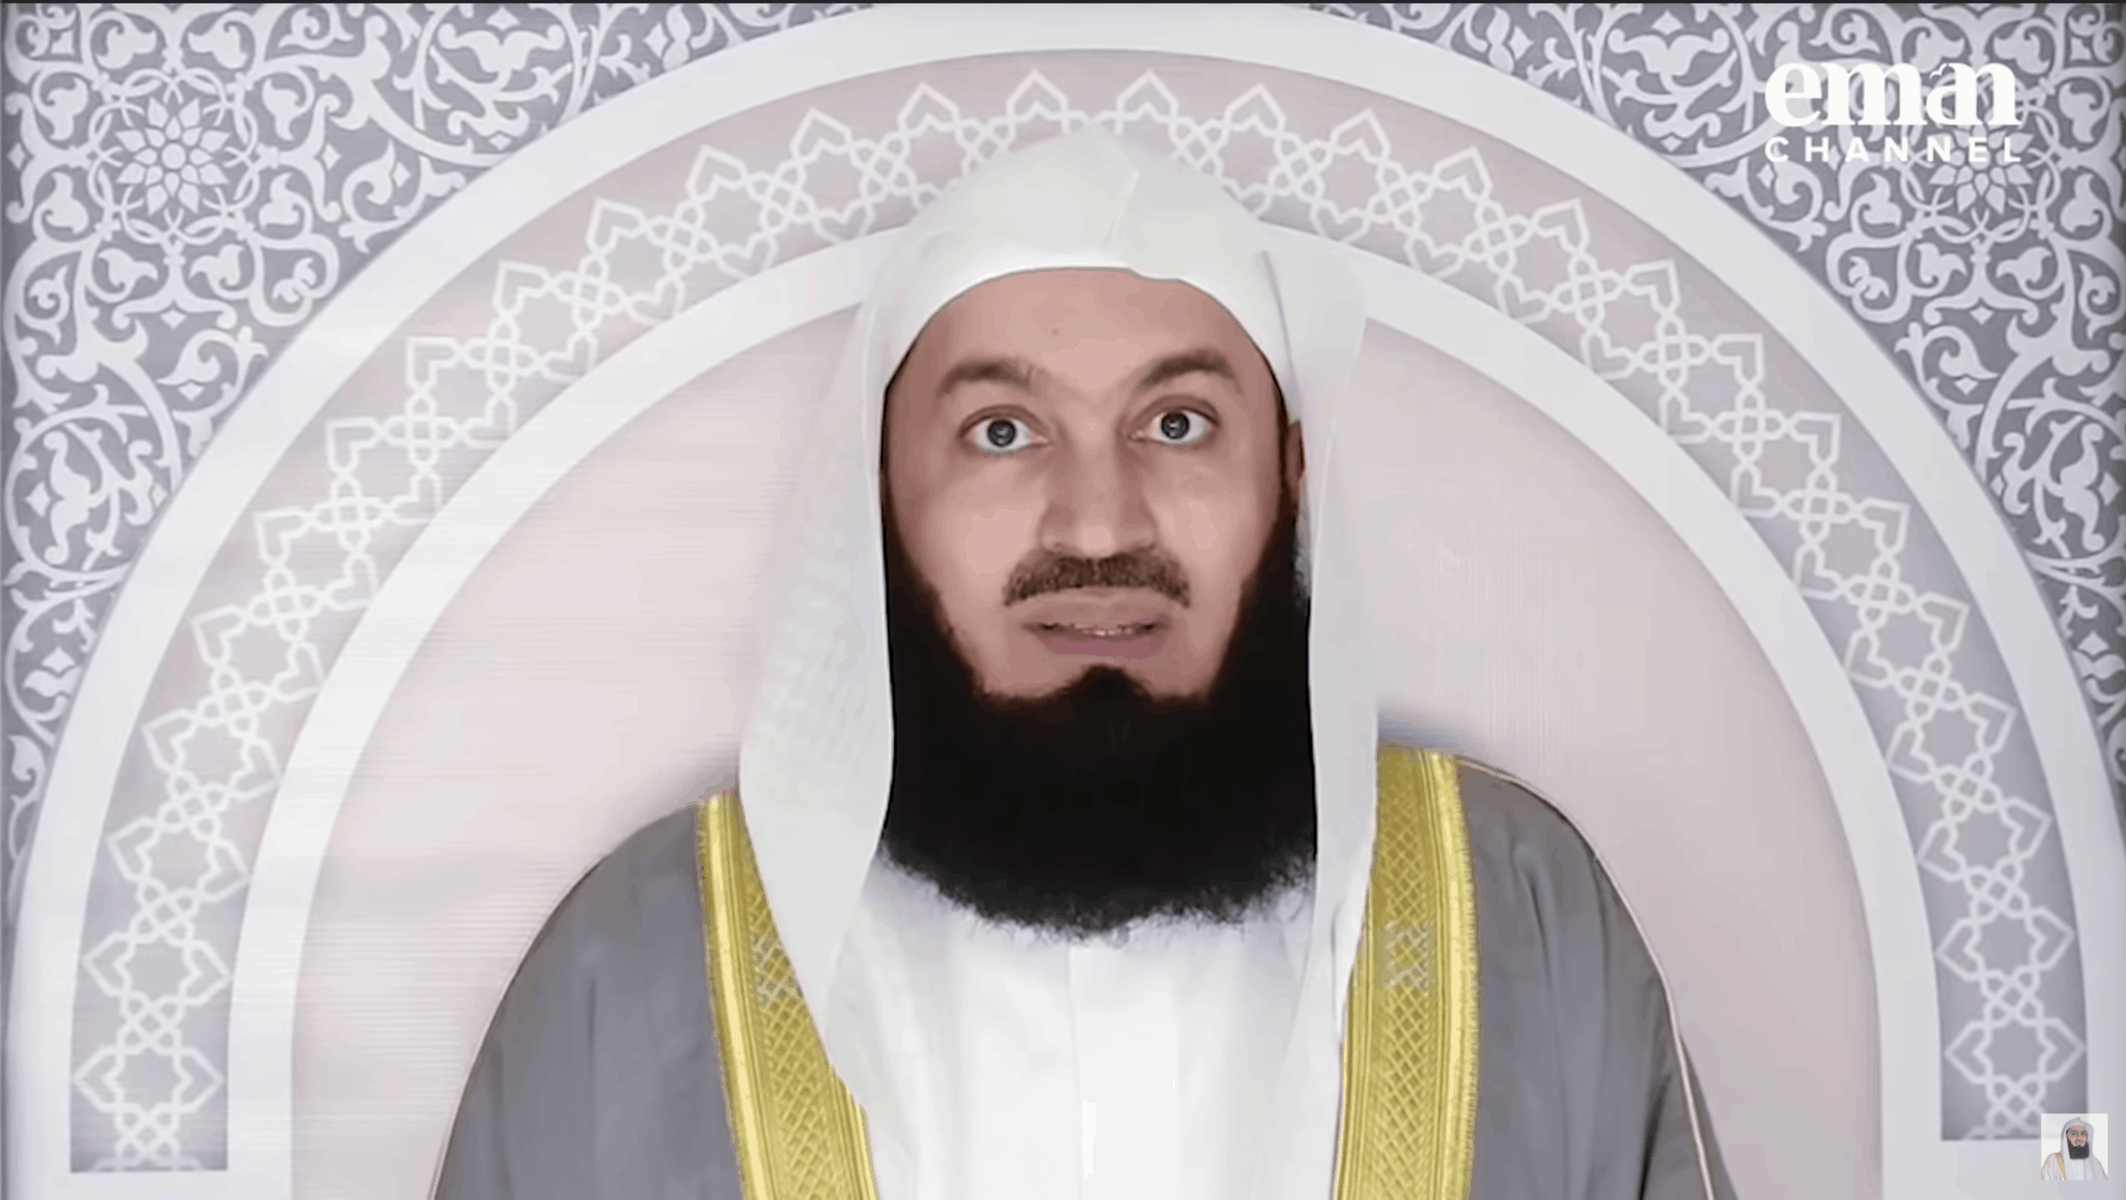 Ismail ibn Musa Menk – Do People Deserve Second Chances?